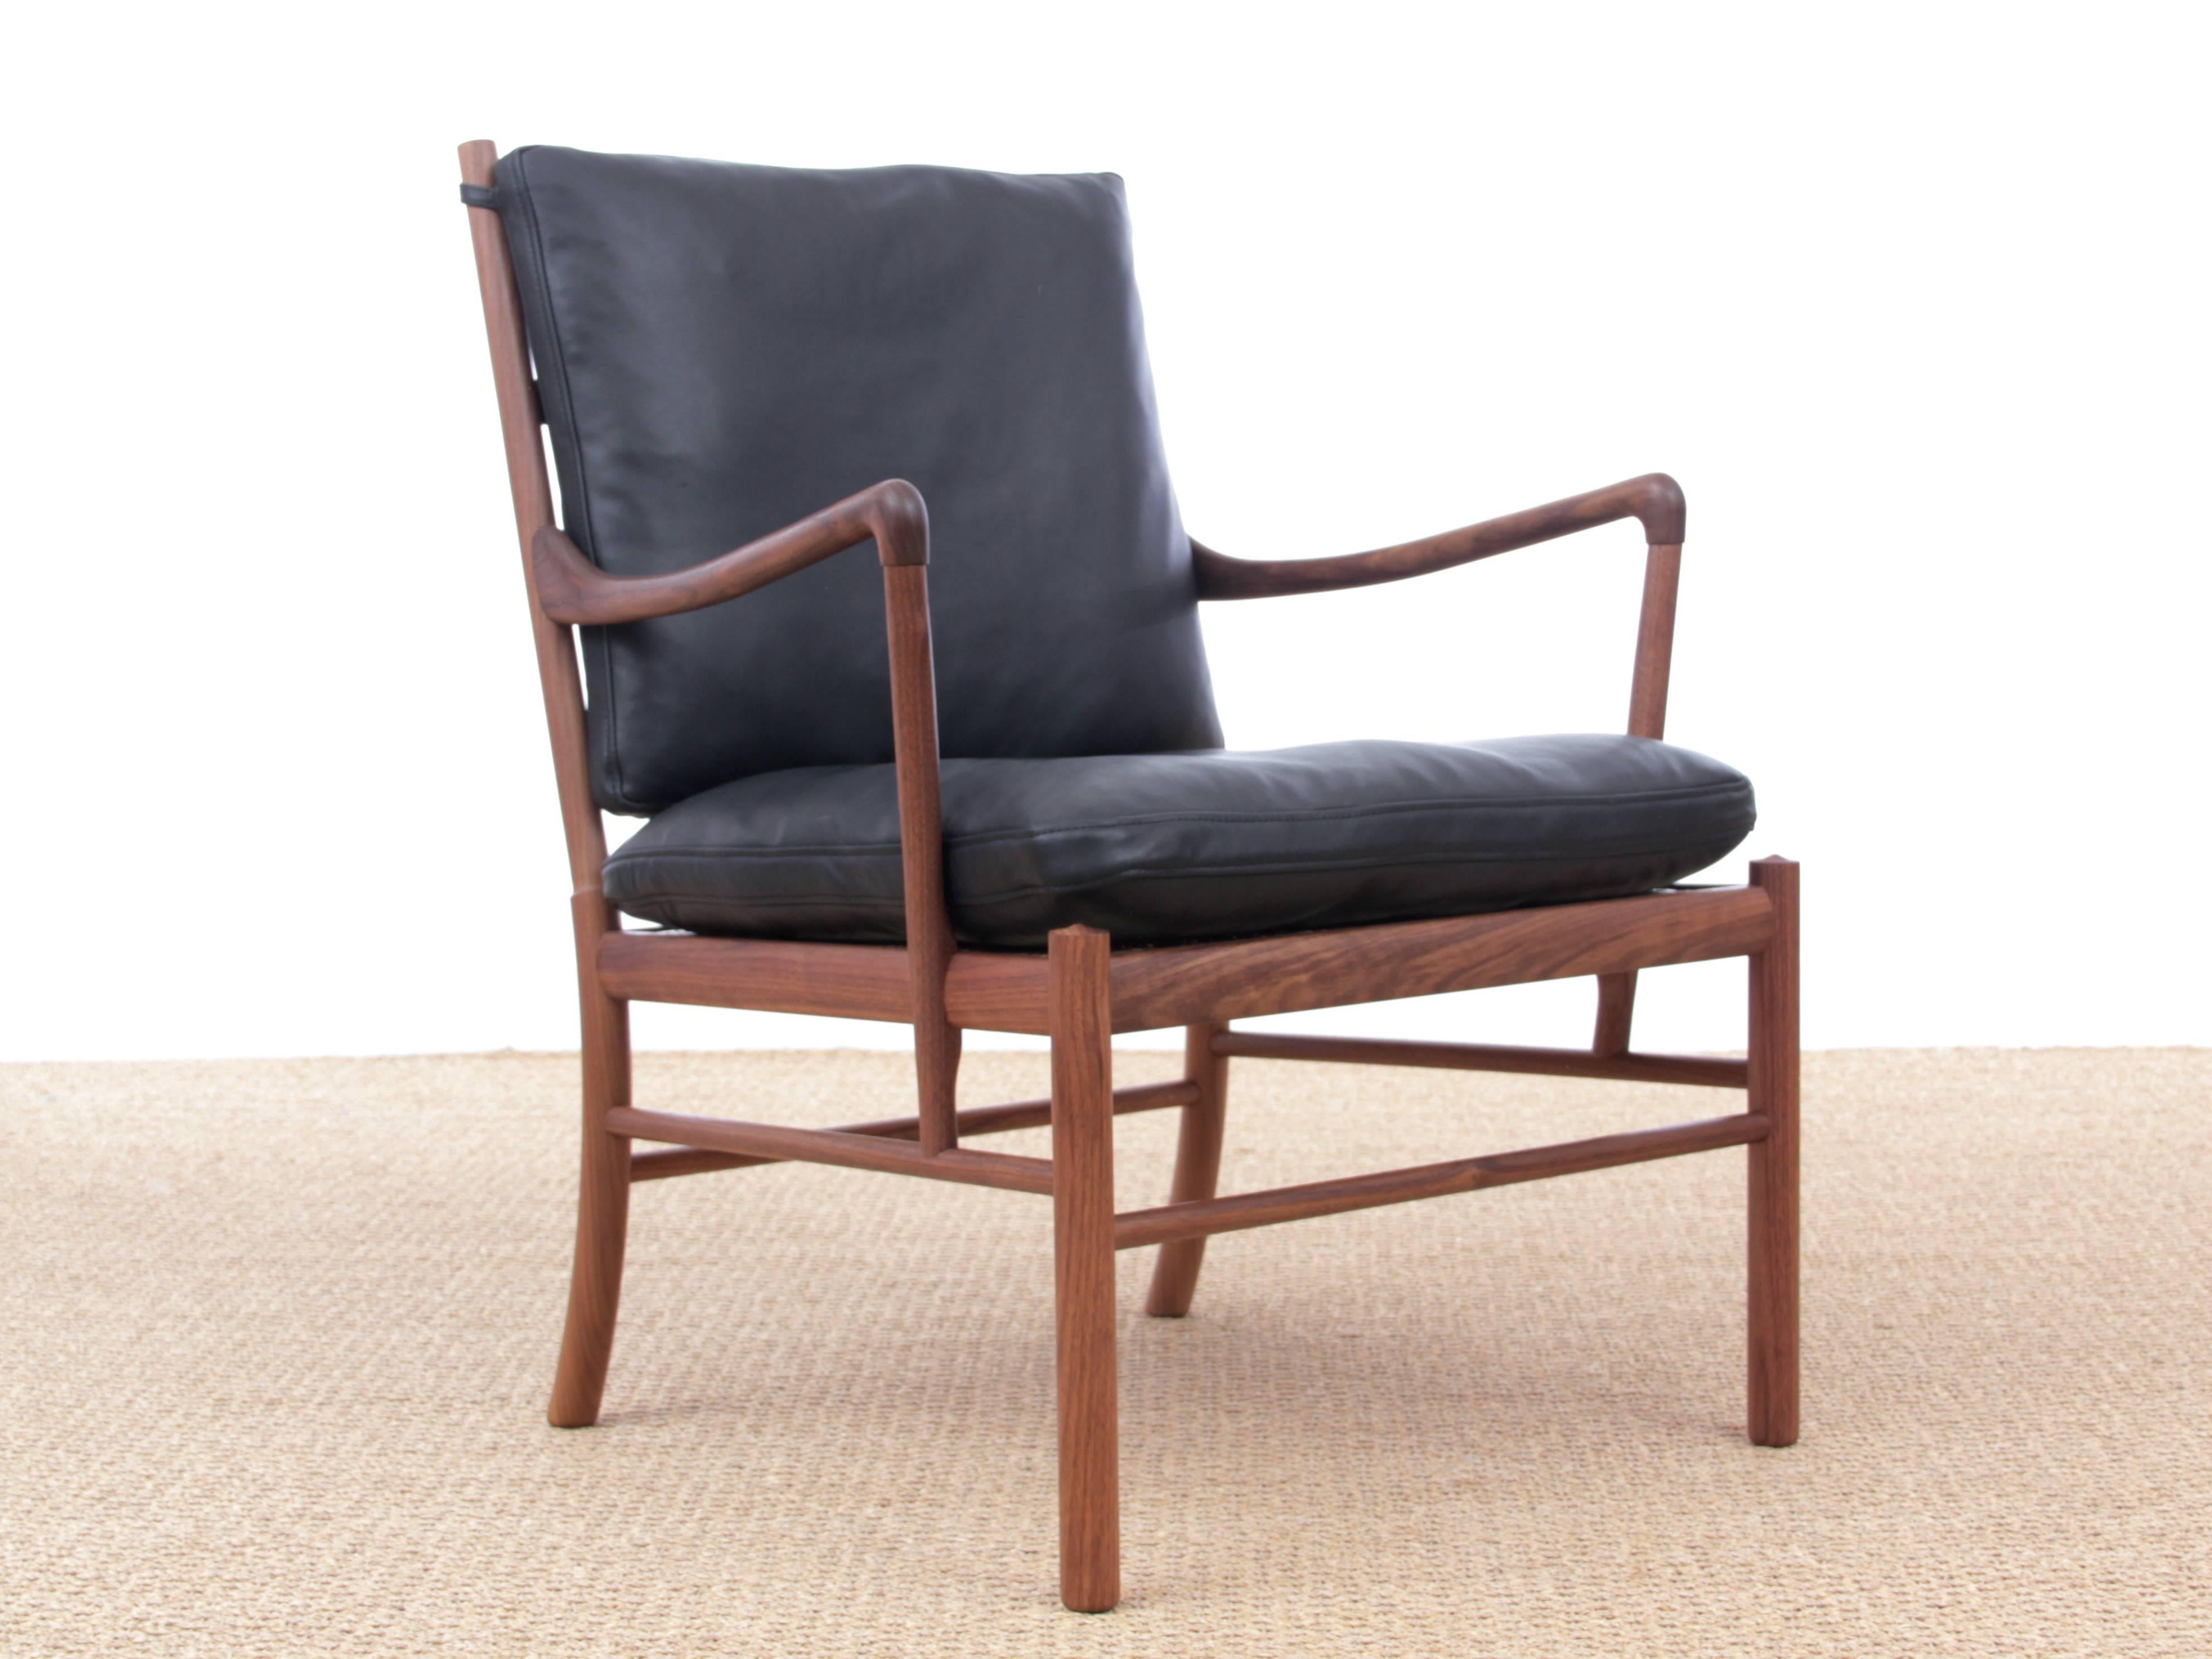 Mid-Century Modern Scandinavian Colonial armchair OW 149 in walnut by Ole Wanscher. Oiled walnut frame. Removable seat in cane. Cushions available in fabric, Loke leather or Sif leather. (See pictures)

Designed in 1949, Ole Wanscher's colonial